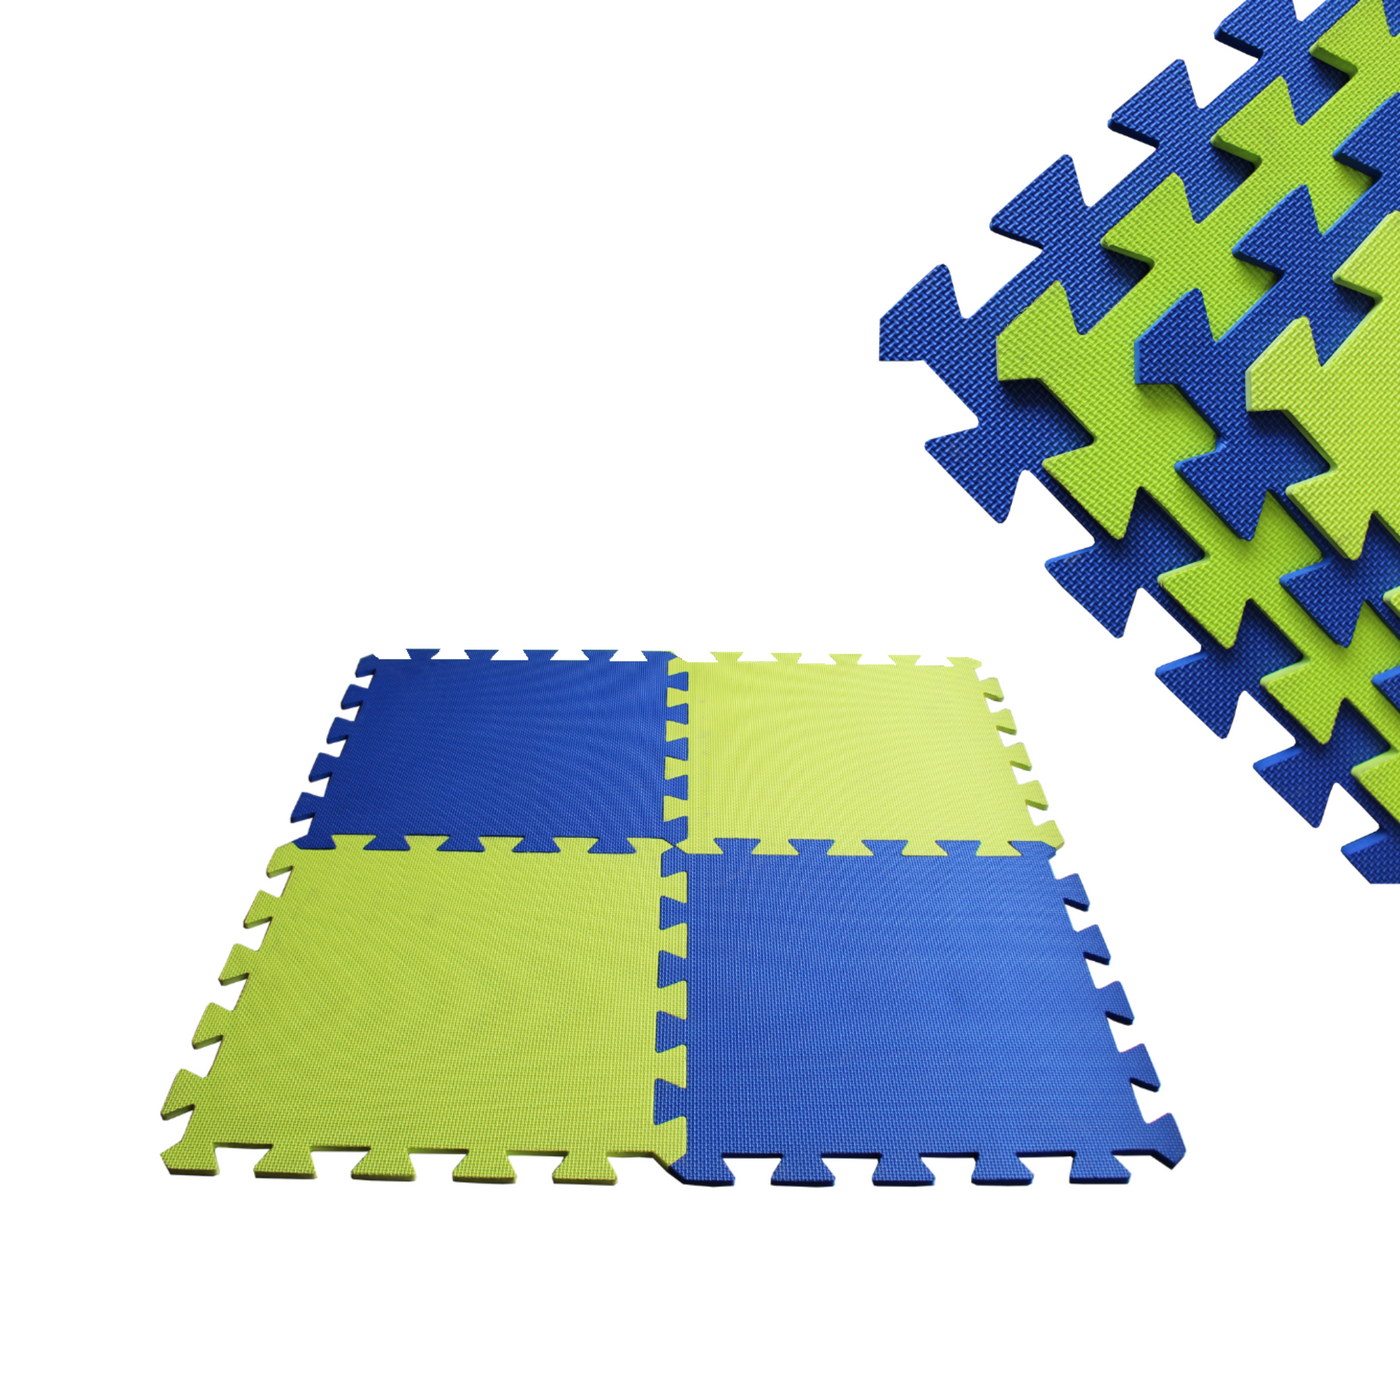 10mm Thick Multi-Coloured Mats | Pack of 4 | Wide Range of Colour Combinations